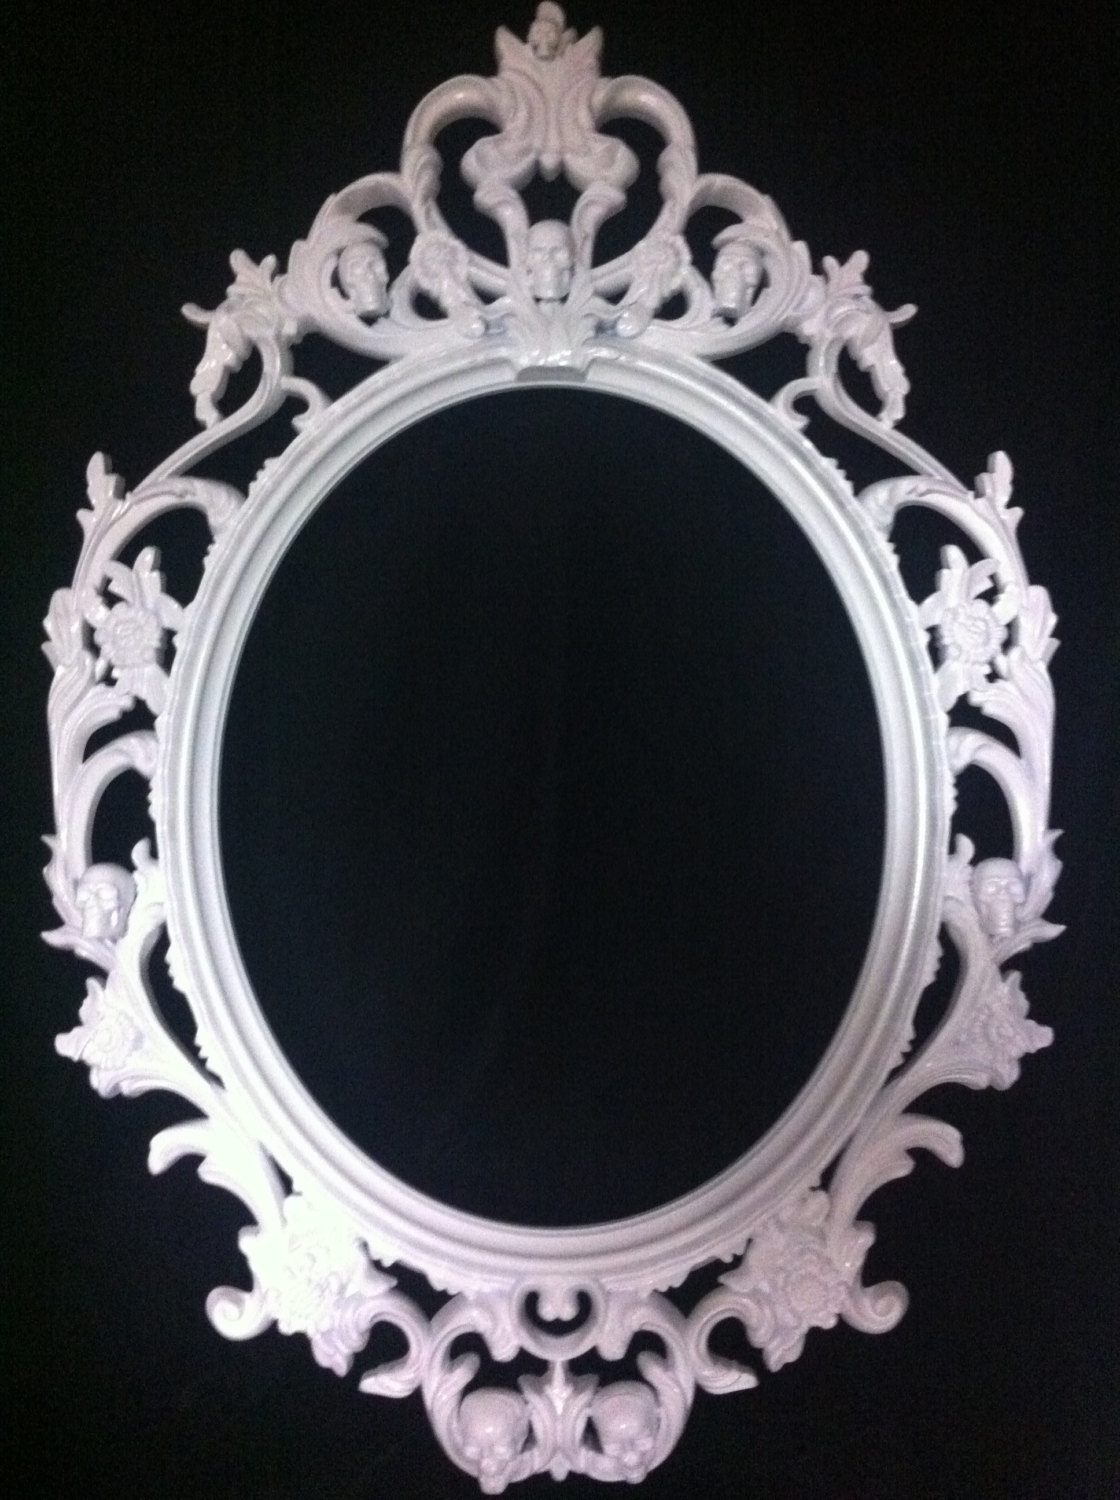 Gloss white skull oval picture frame mirror shabby chic baroque